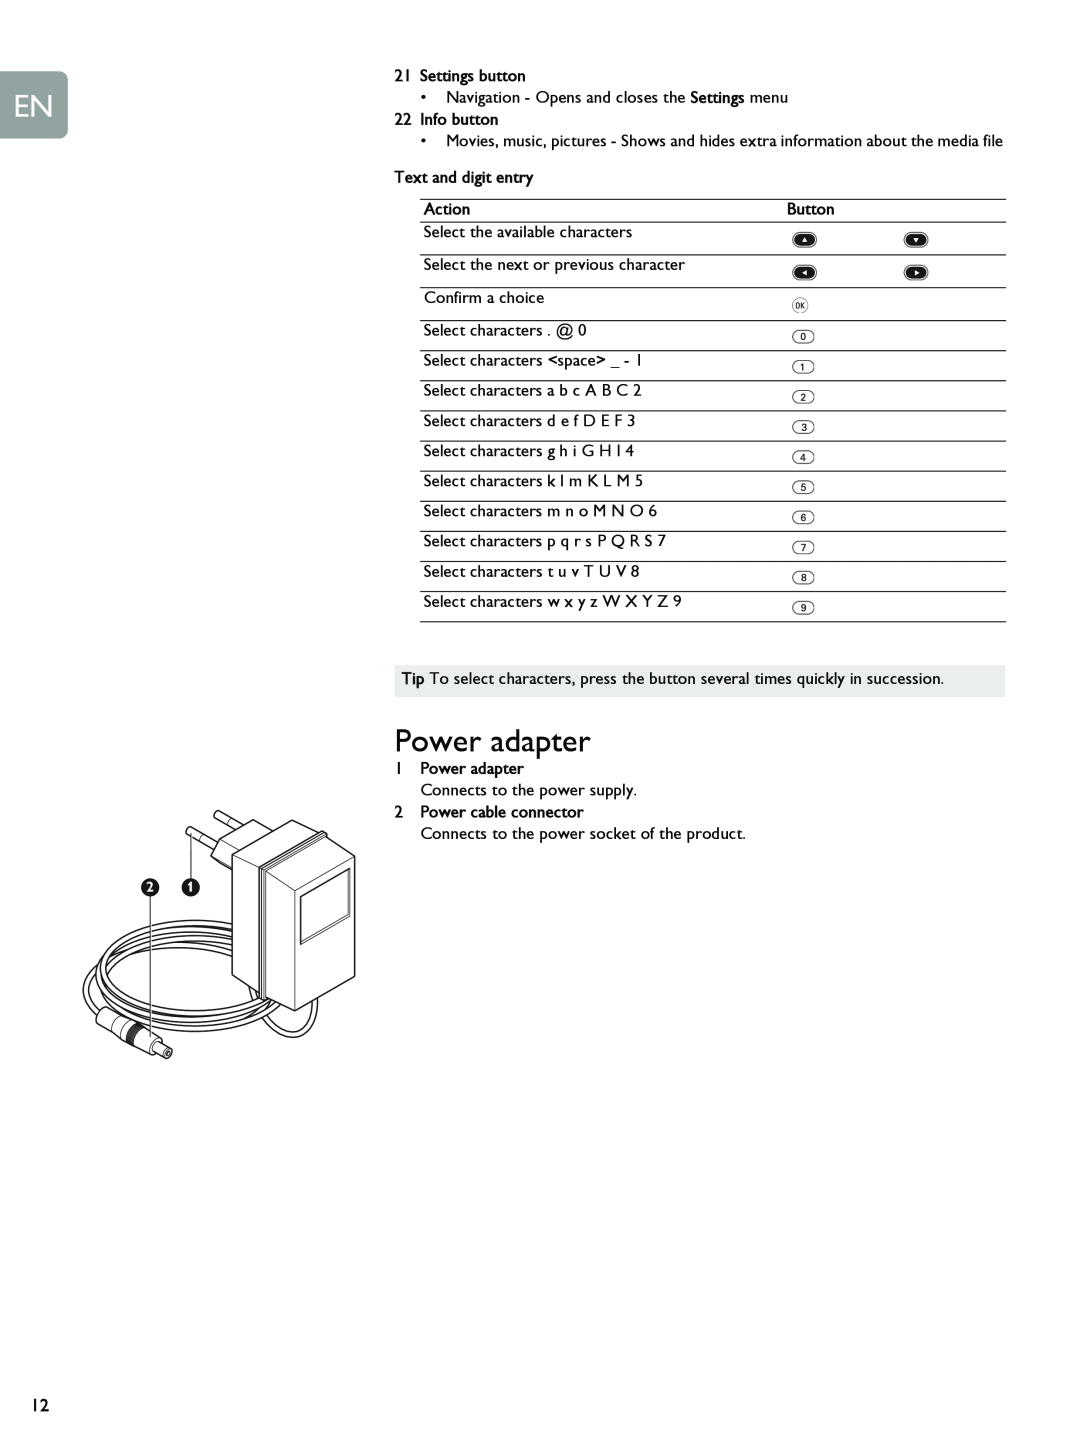 Philips SLM5500 Power adapter, Settings button, Info button, Text and digit entry, Action, Button, Power cable connector 